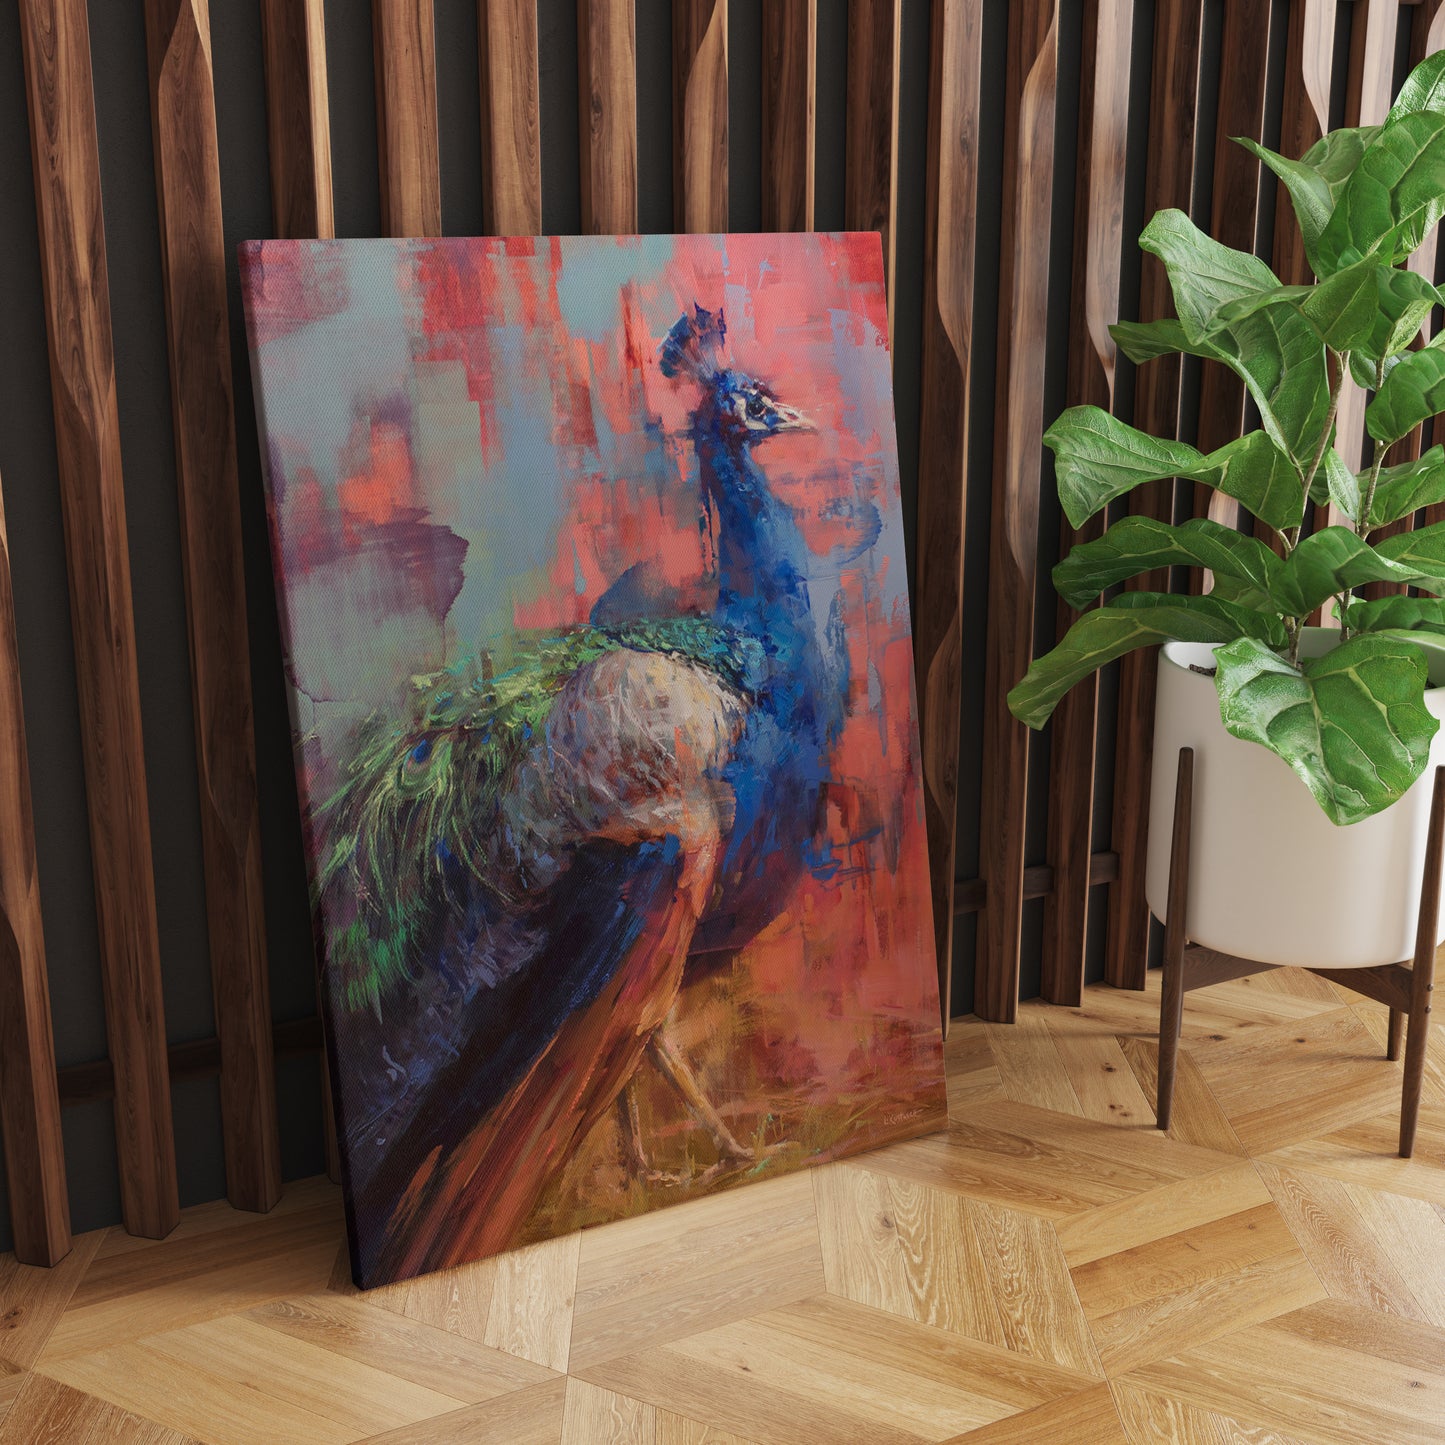 Elegance Unveiled: A Wall Art Showcasing a Captivating Painting of a Peacock - Celebrate Nature's Beauty in Vibrant Colors - S05E61